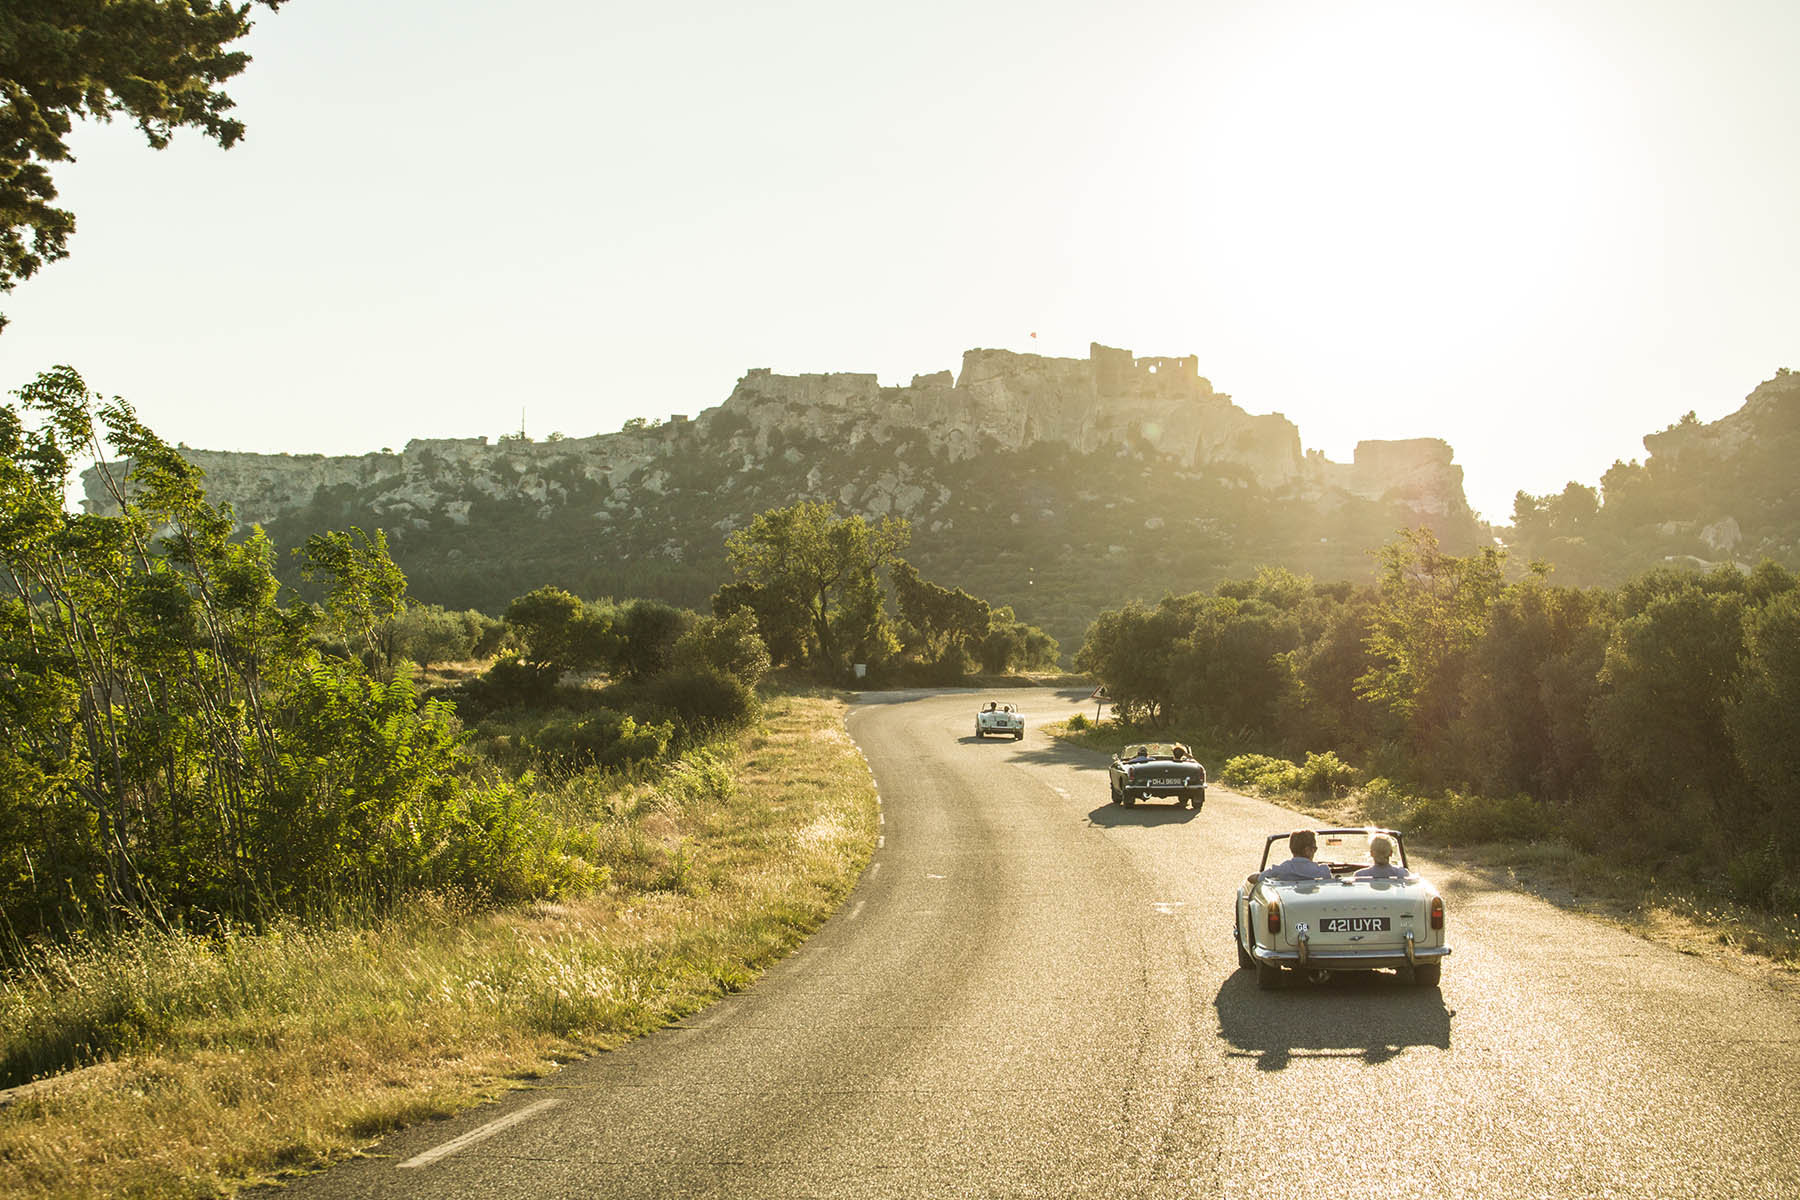 A photo from a rally experience with Provence Classics who offer classic rentals in the south of France.